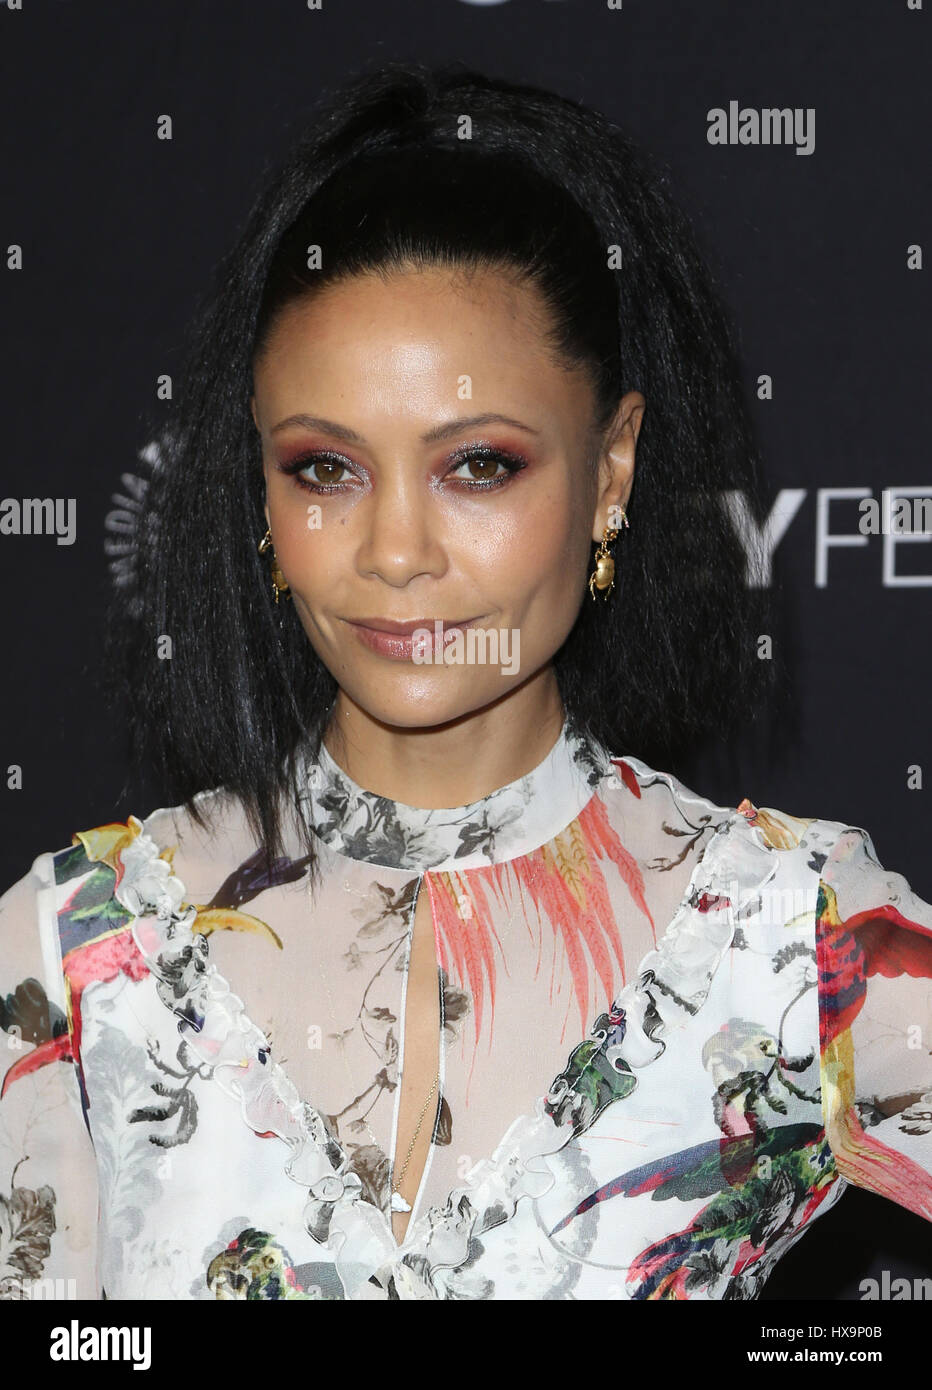 Hollywood, Ca. 25th Mar, 2017. Thandie Newton, At The The Paley Center For Media's 34th Annual PaleyFest Los Angeles - 'Westworld' At The Dolby Theatre In California on March 25, 2017. Credit: Fs/Media Punch/Alamy Live News Stock Photo